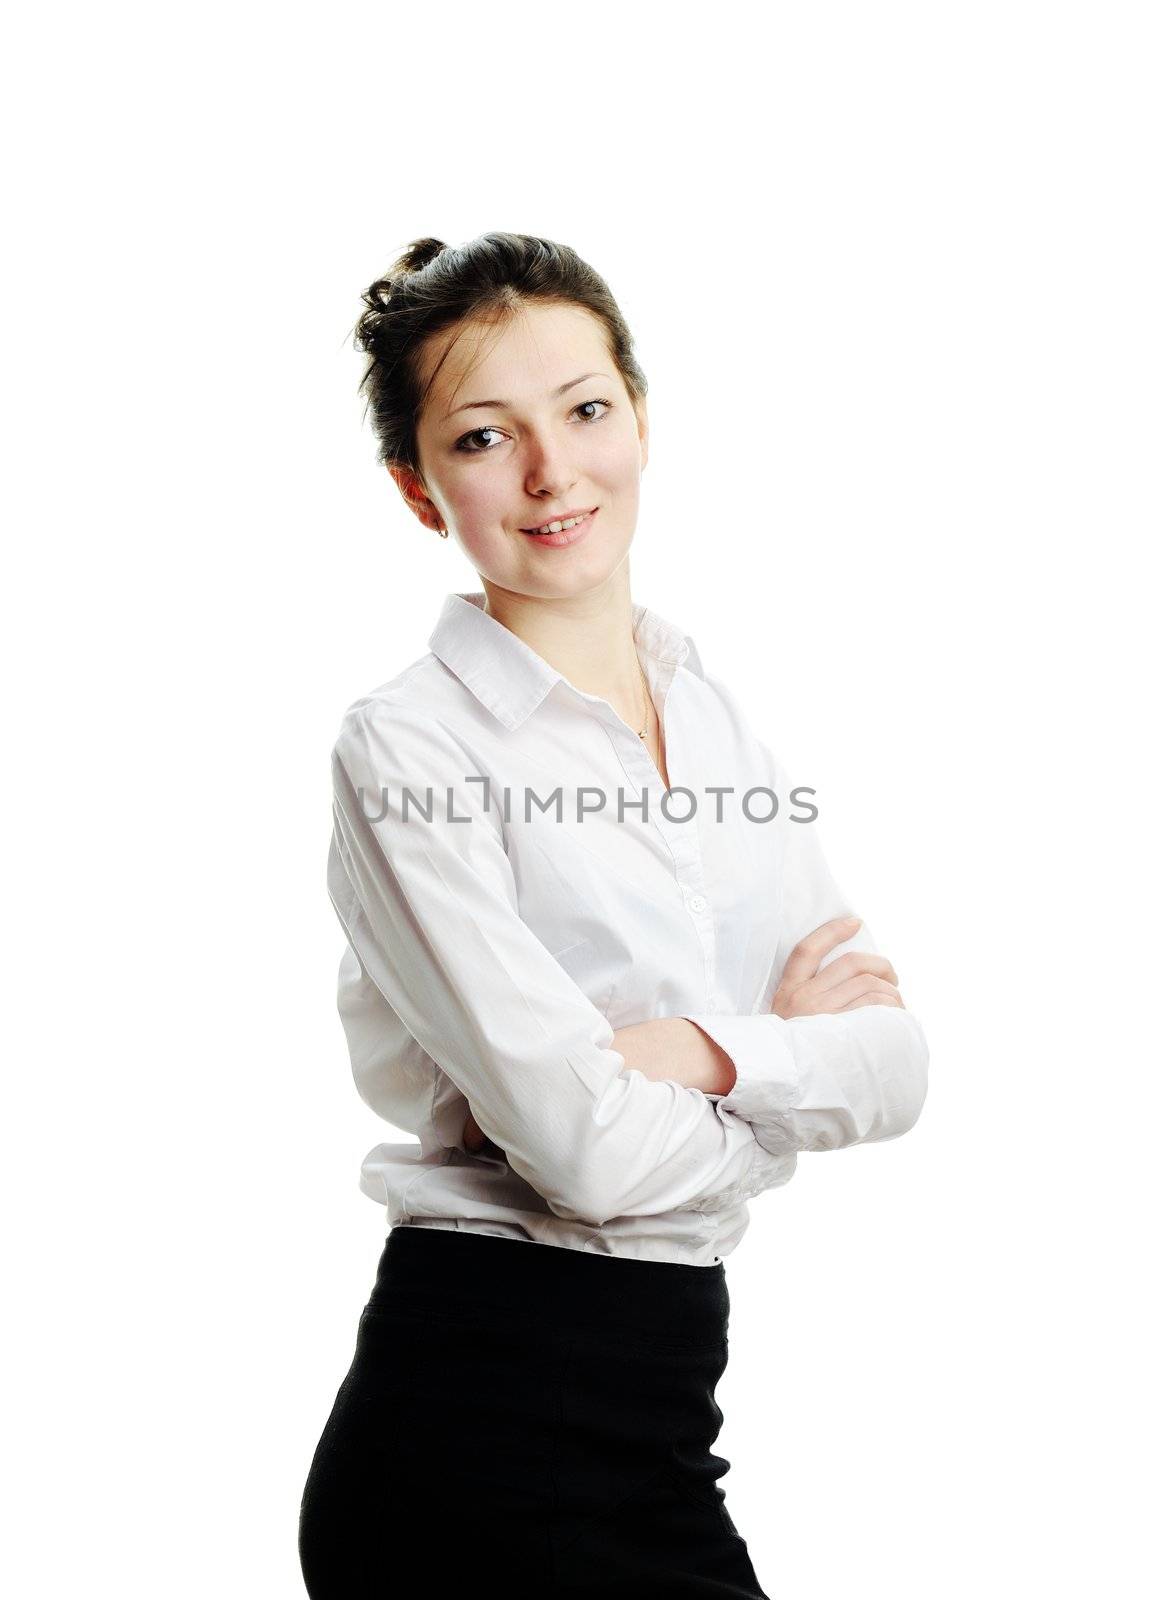 A portrait of a young beautiful business woman